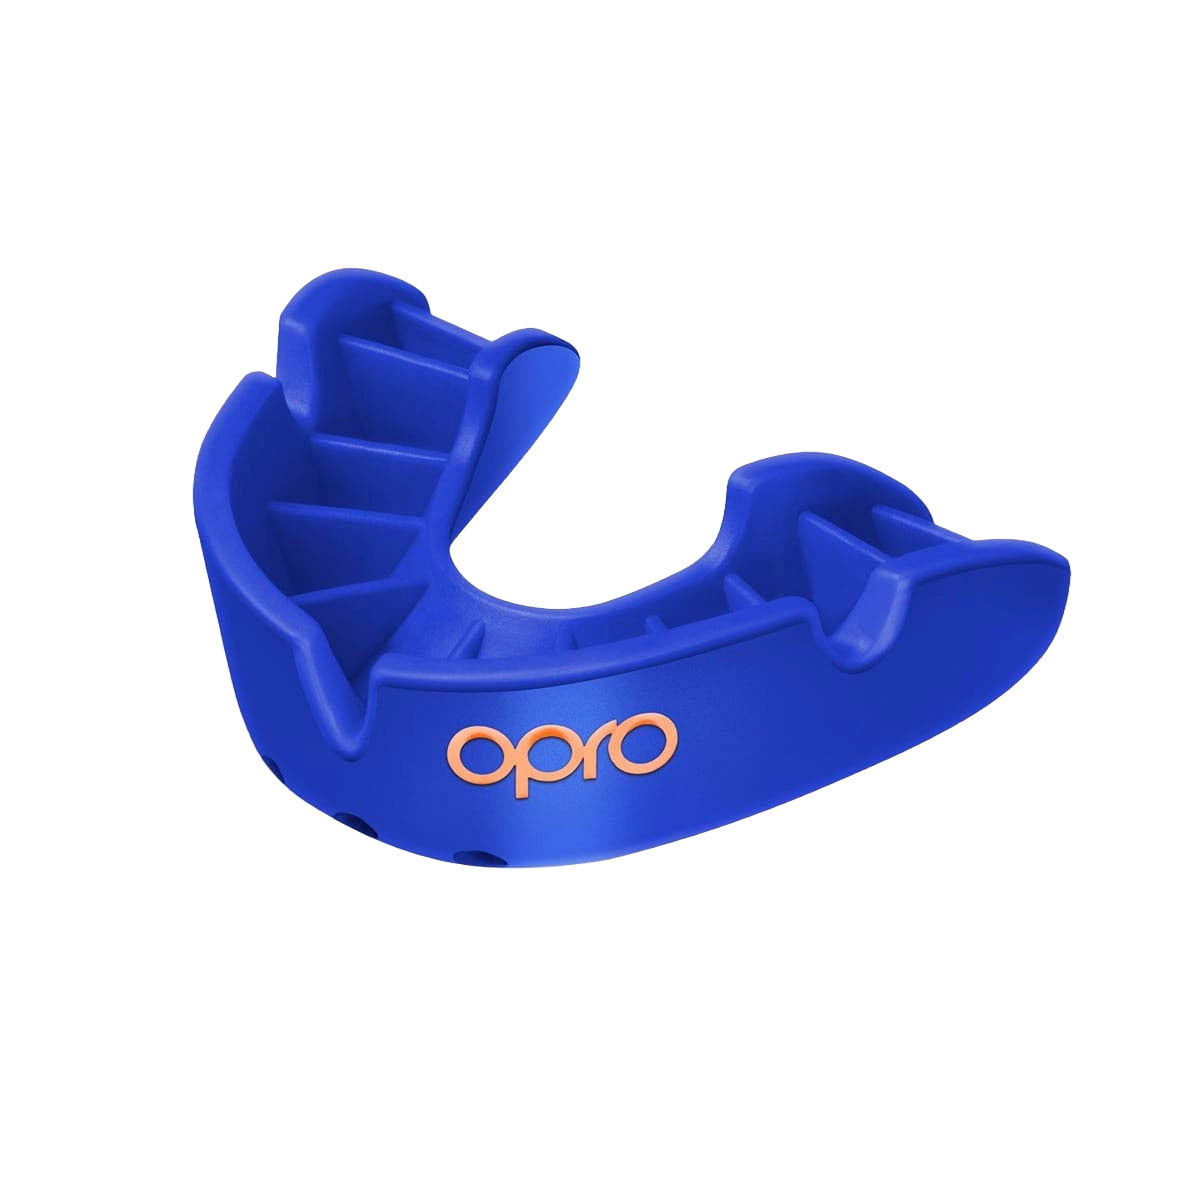 Opro Bronze Self-Fit Mouth Guard Blue   